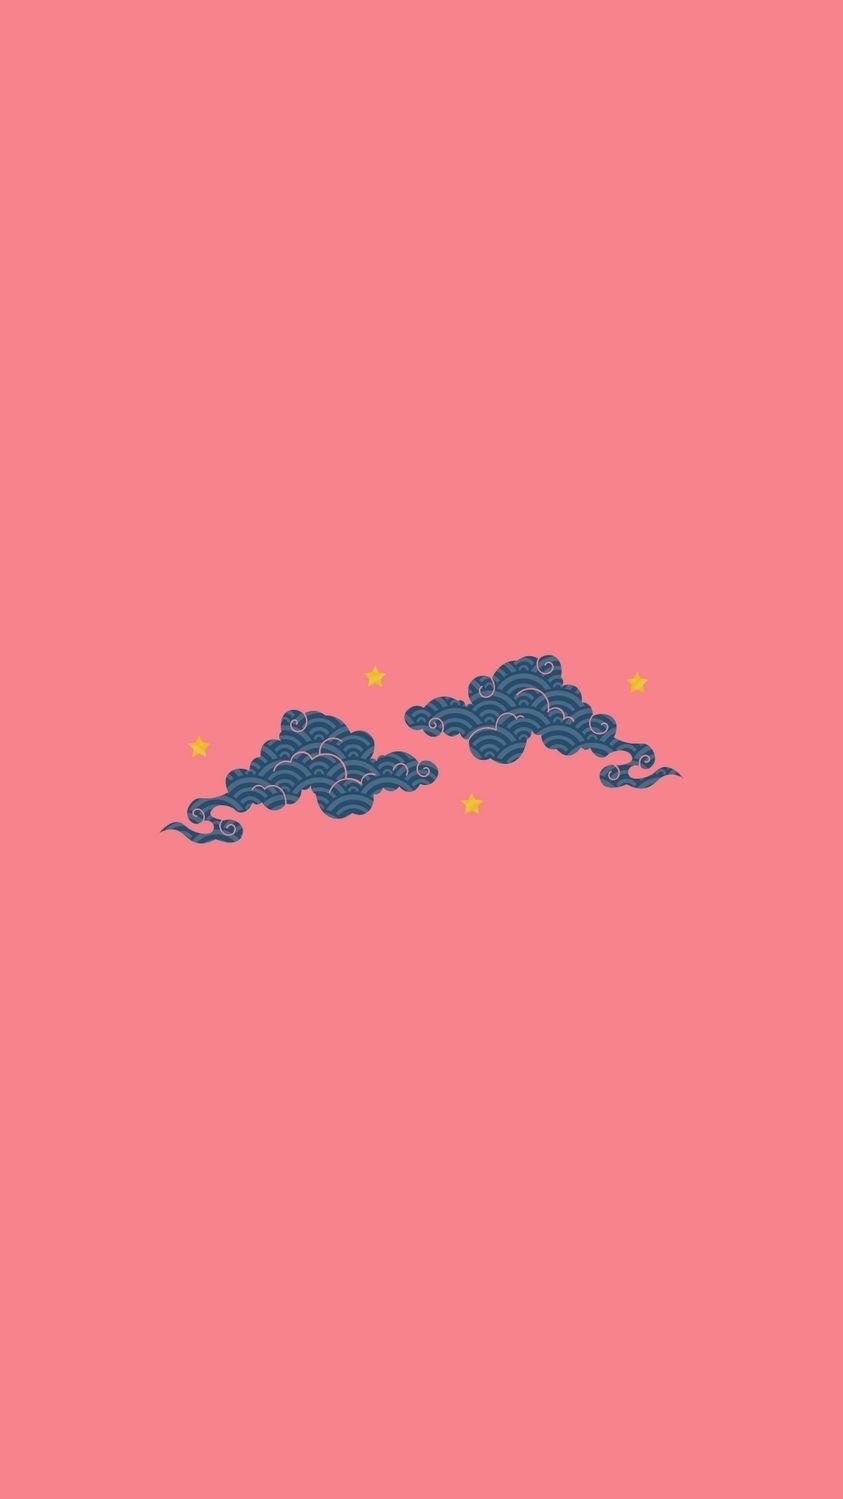 Pink background with blue clouds and yellow stars - Minimalist